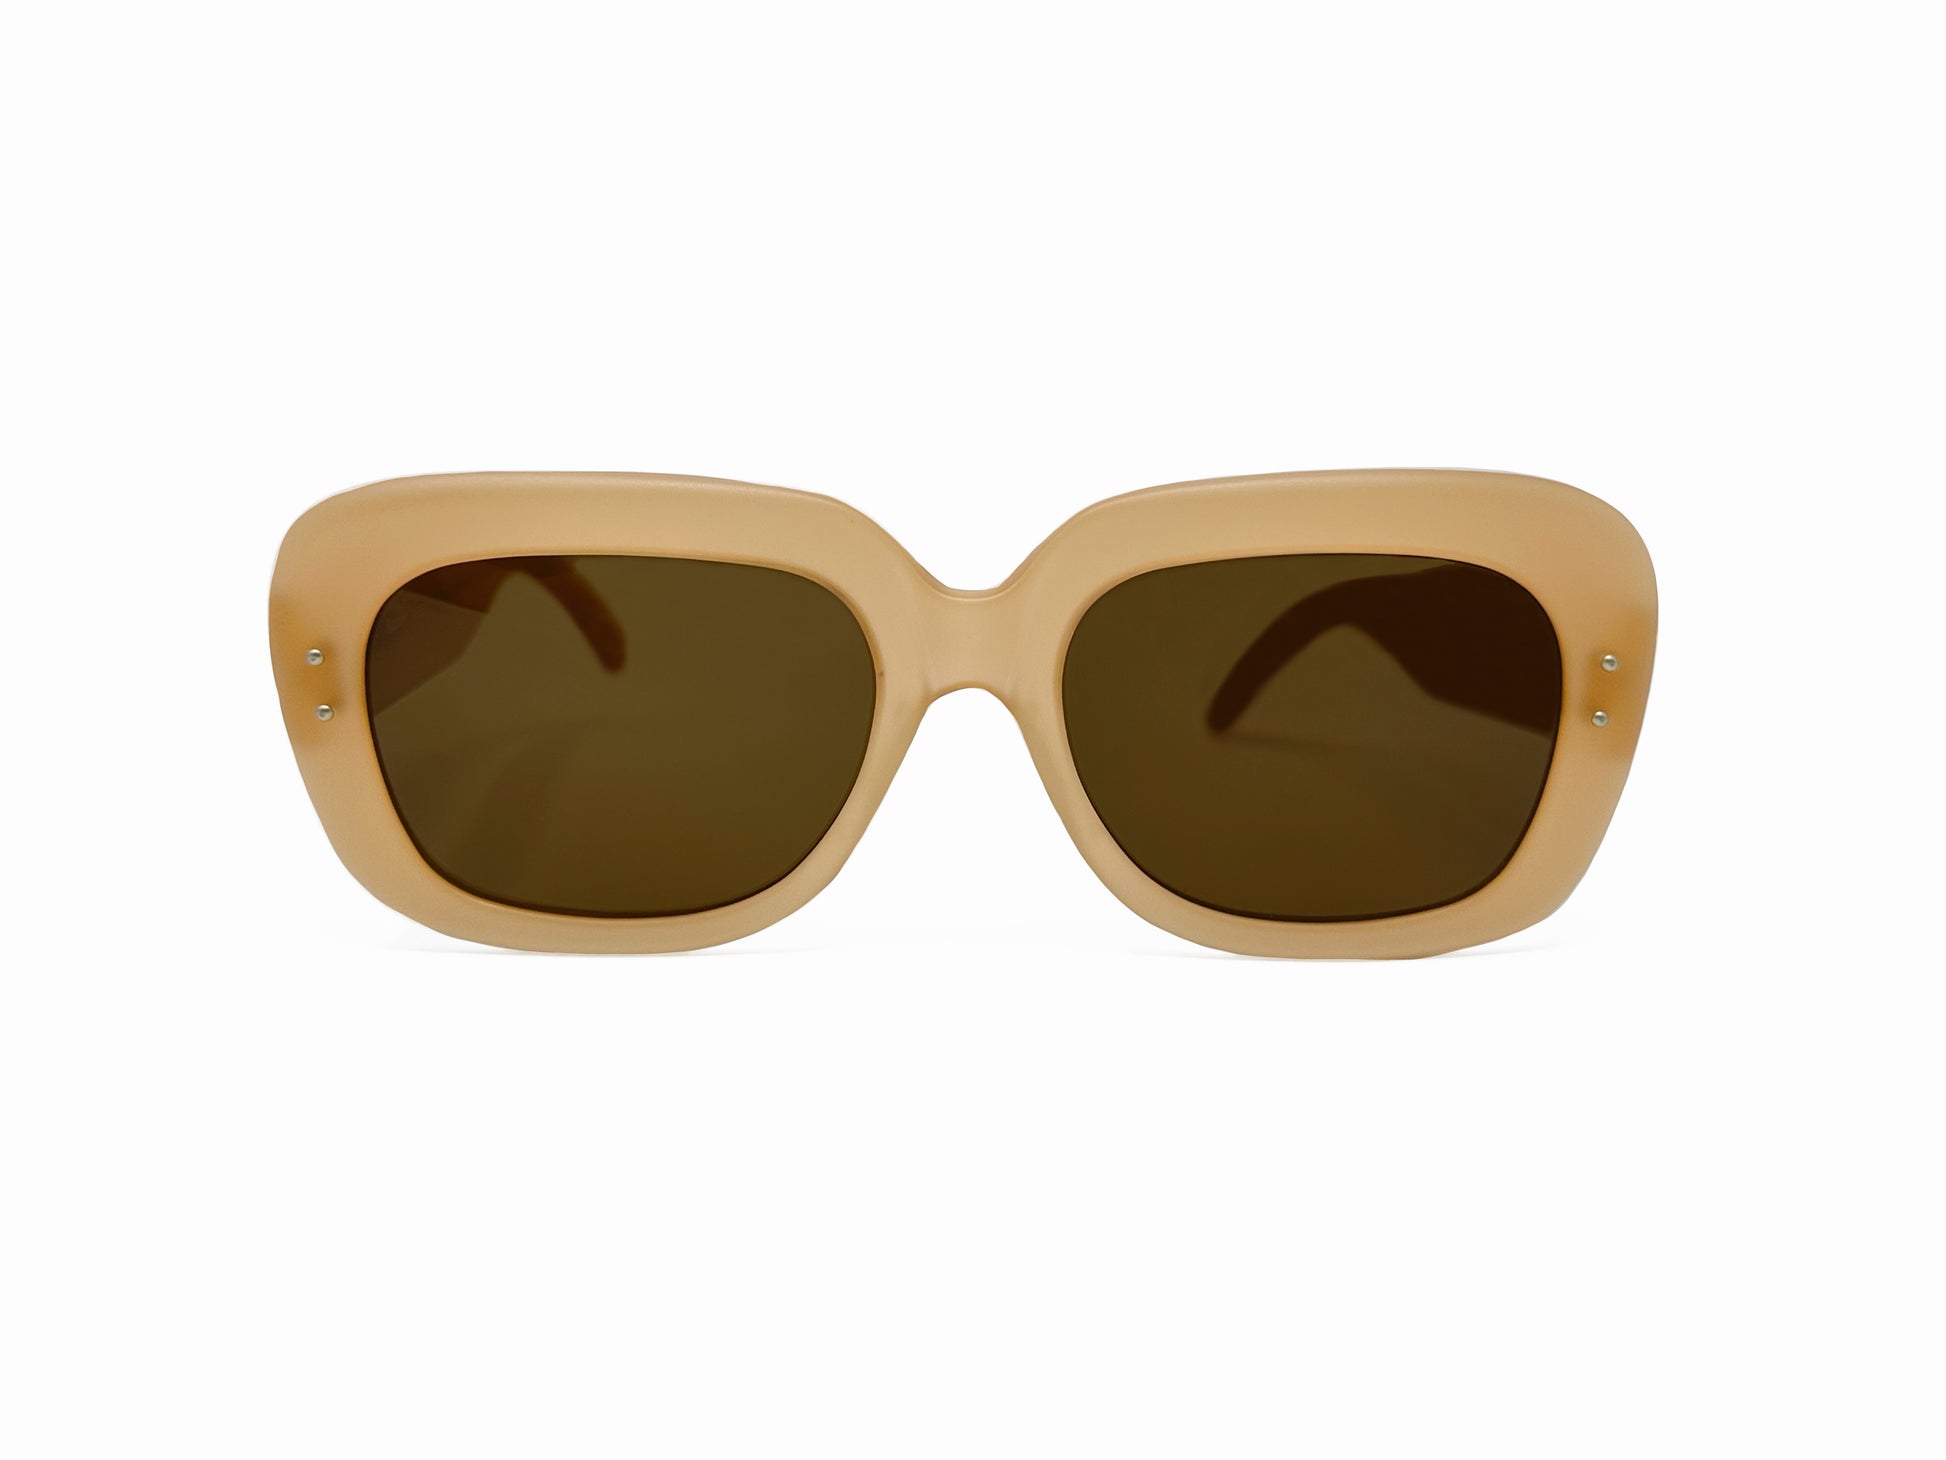 Kador rounded-square, acetate sunglasses. Model: 2. Color: M/1652 - Beige with brown lenses. Front view.